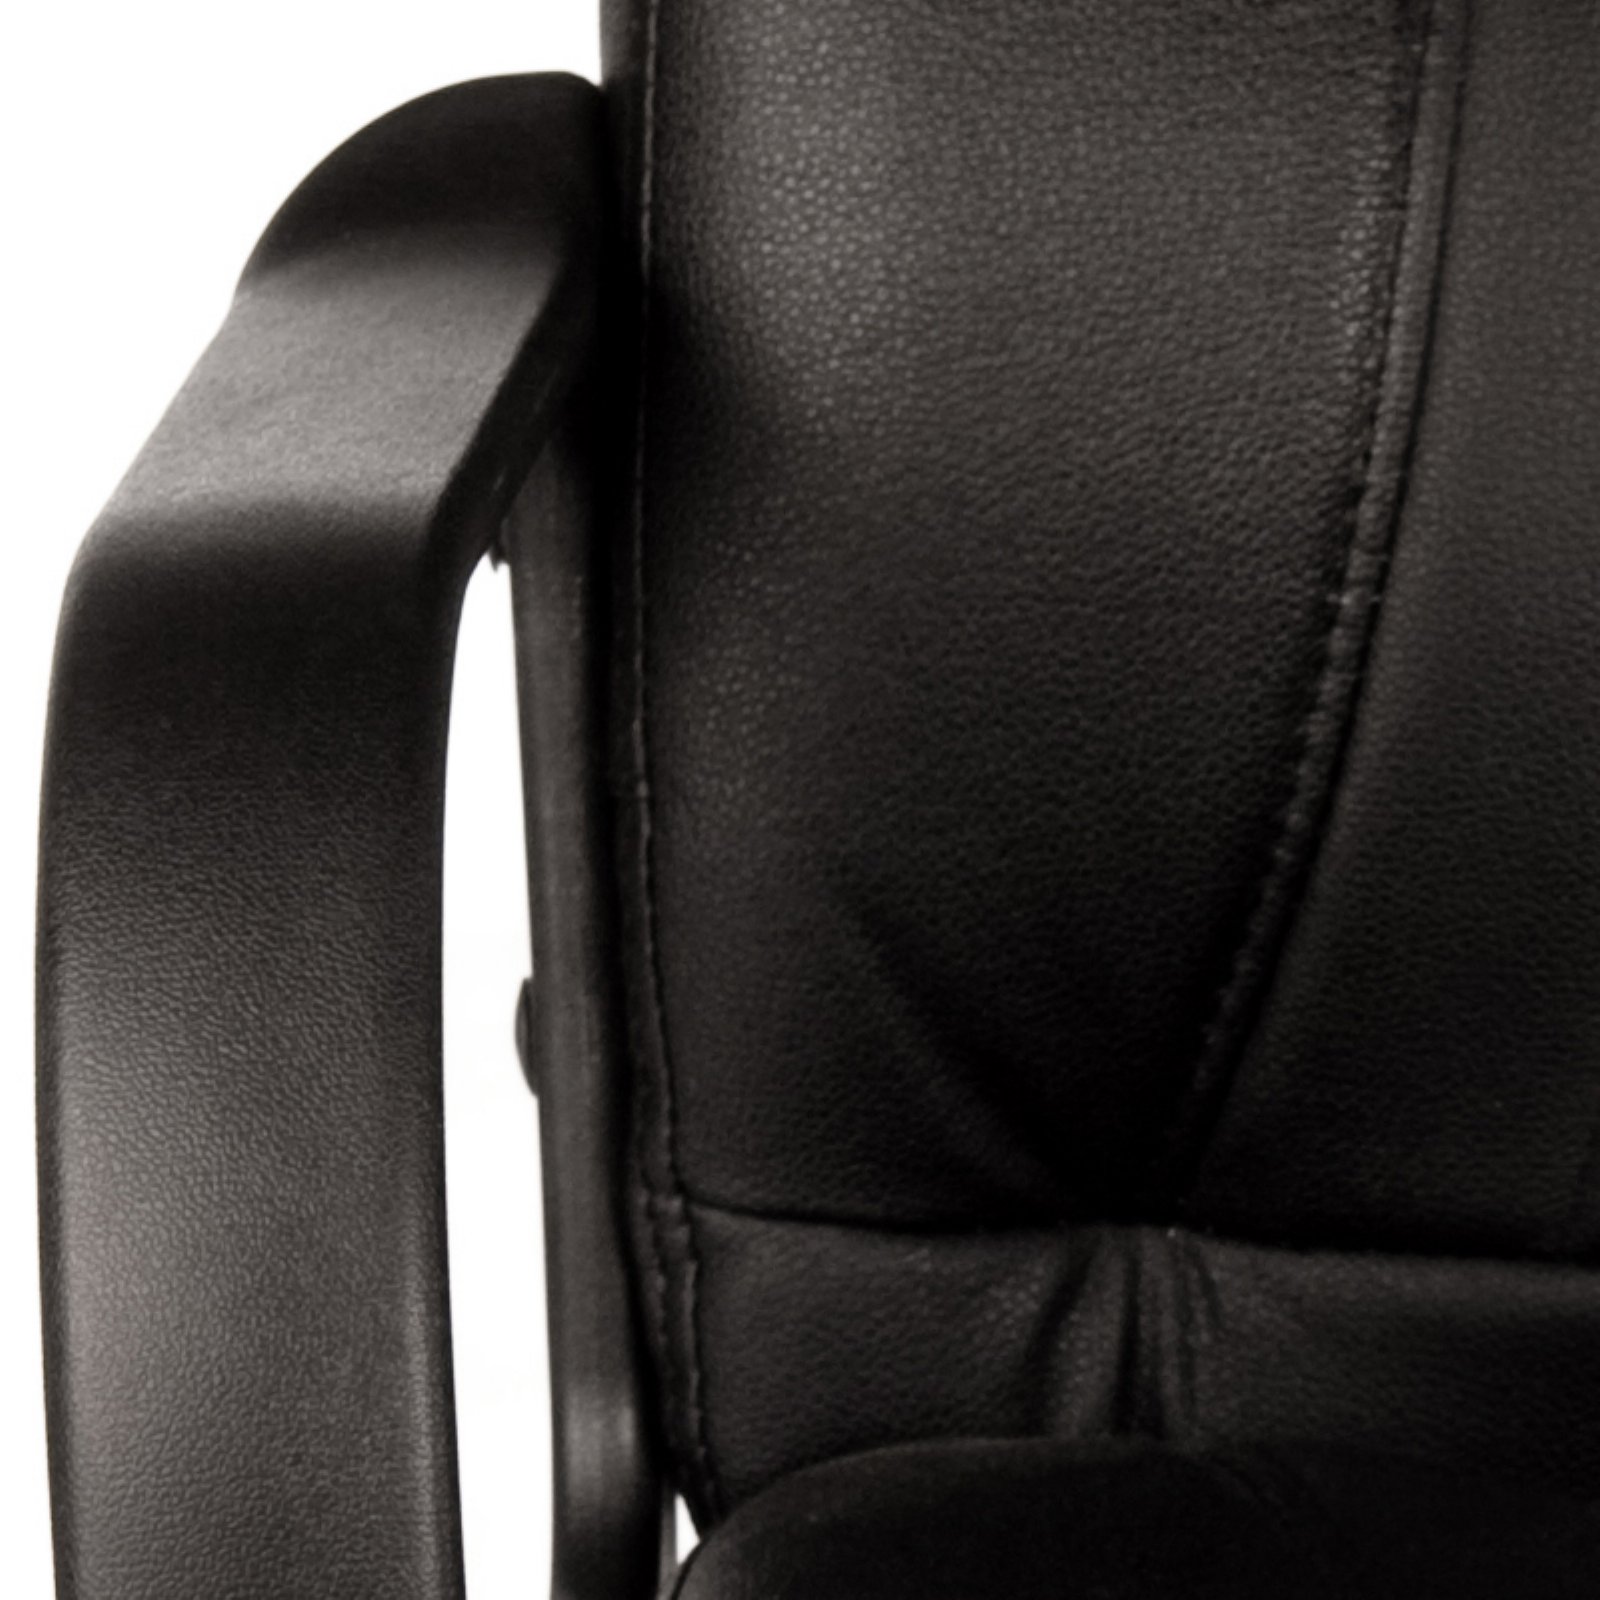 Comfort Products 60-5607M Mid-Back Leather Office Chair, Black - image 2 of 6